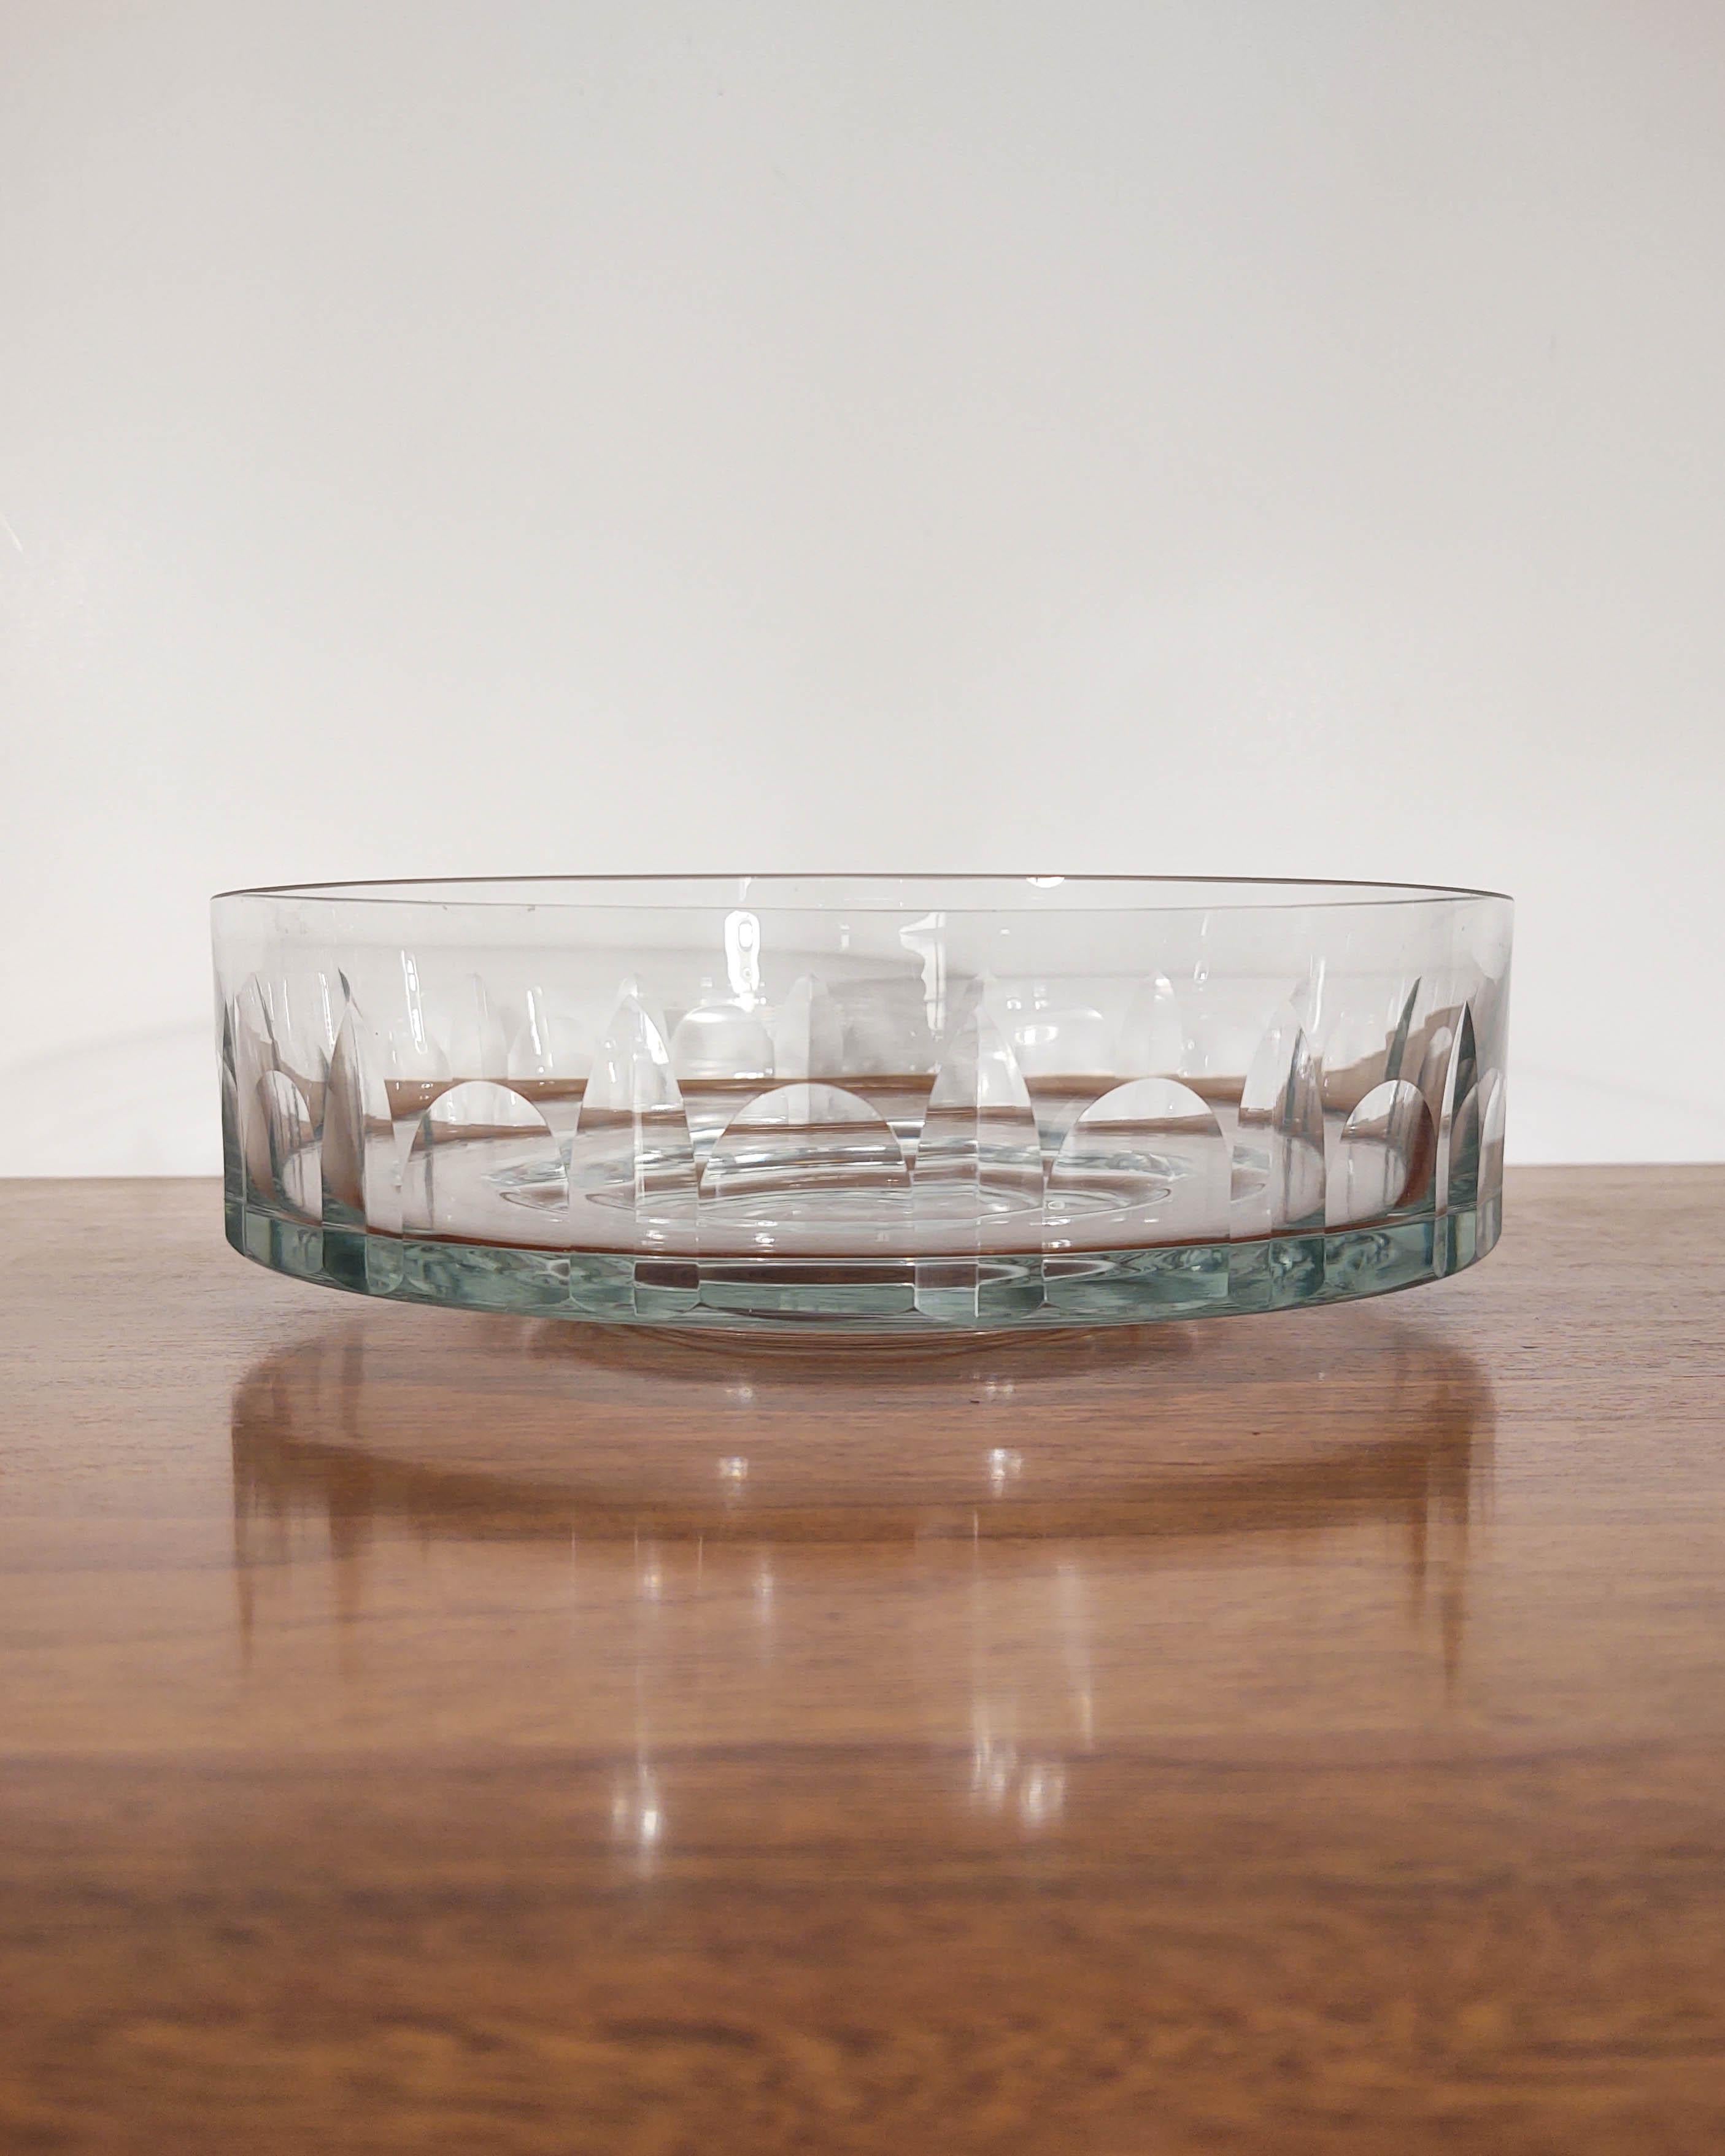 Faceted edge-square cylindrical serving bowl with straight sides and small hidden foot. Polished arch facets catch the light beautifully. Excellent vintage condition.

10.5